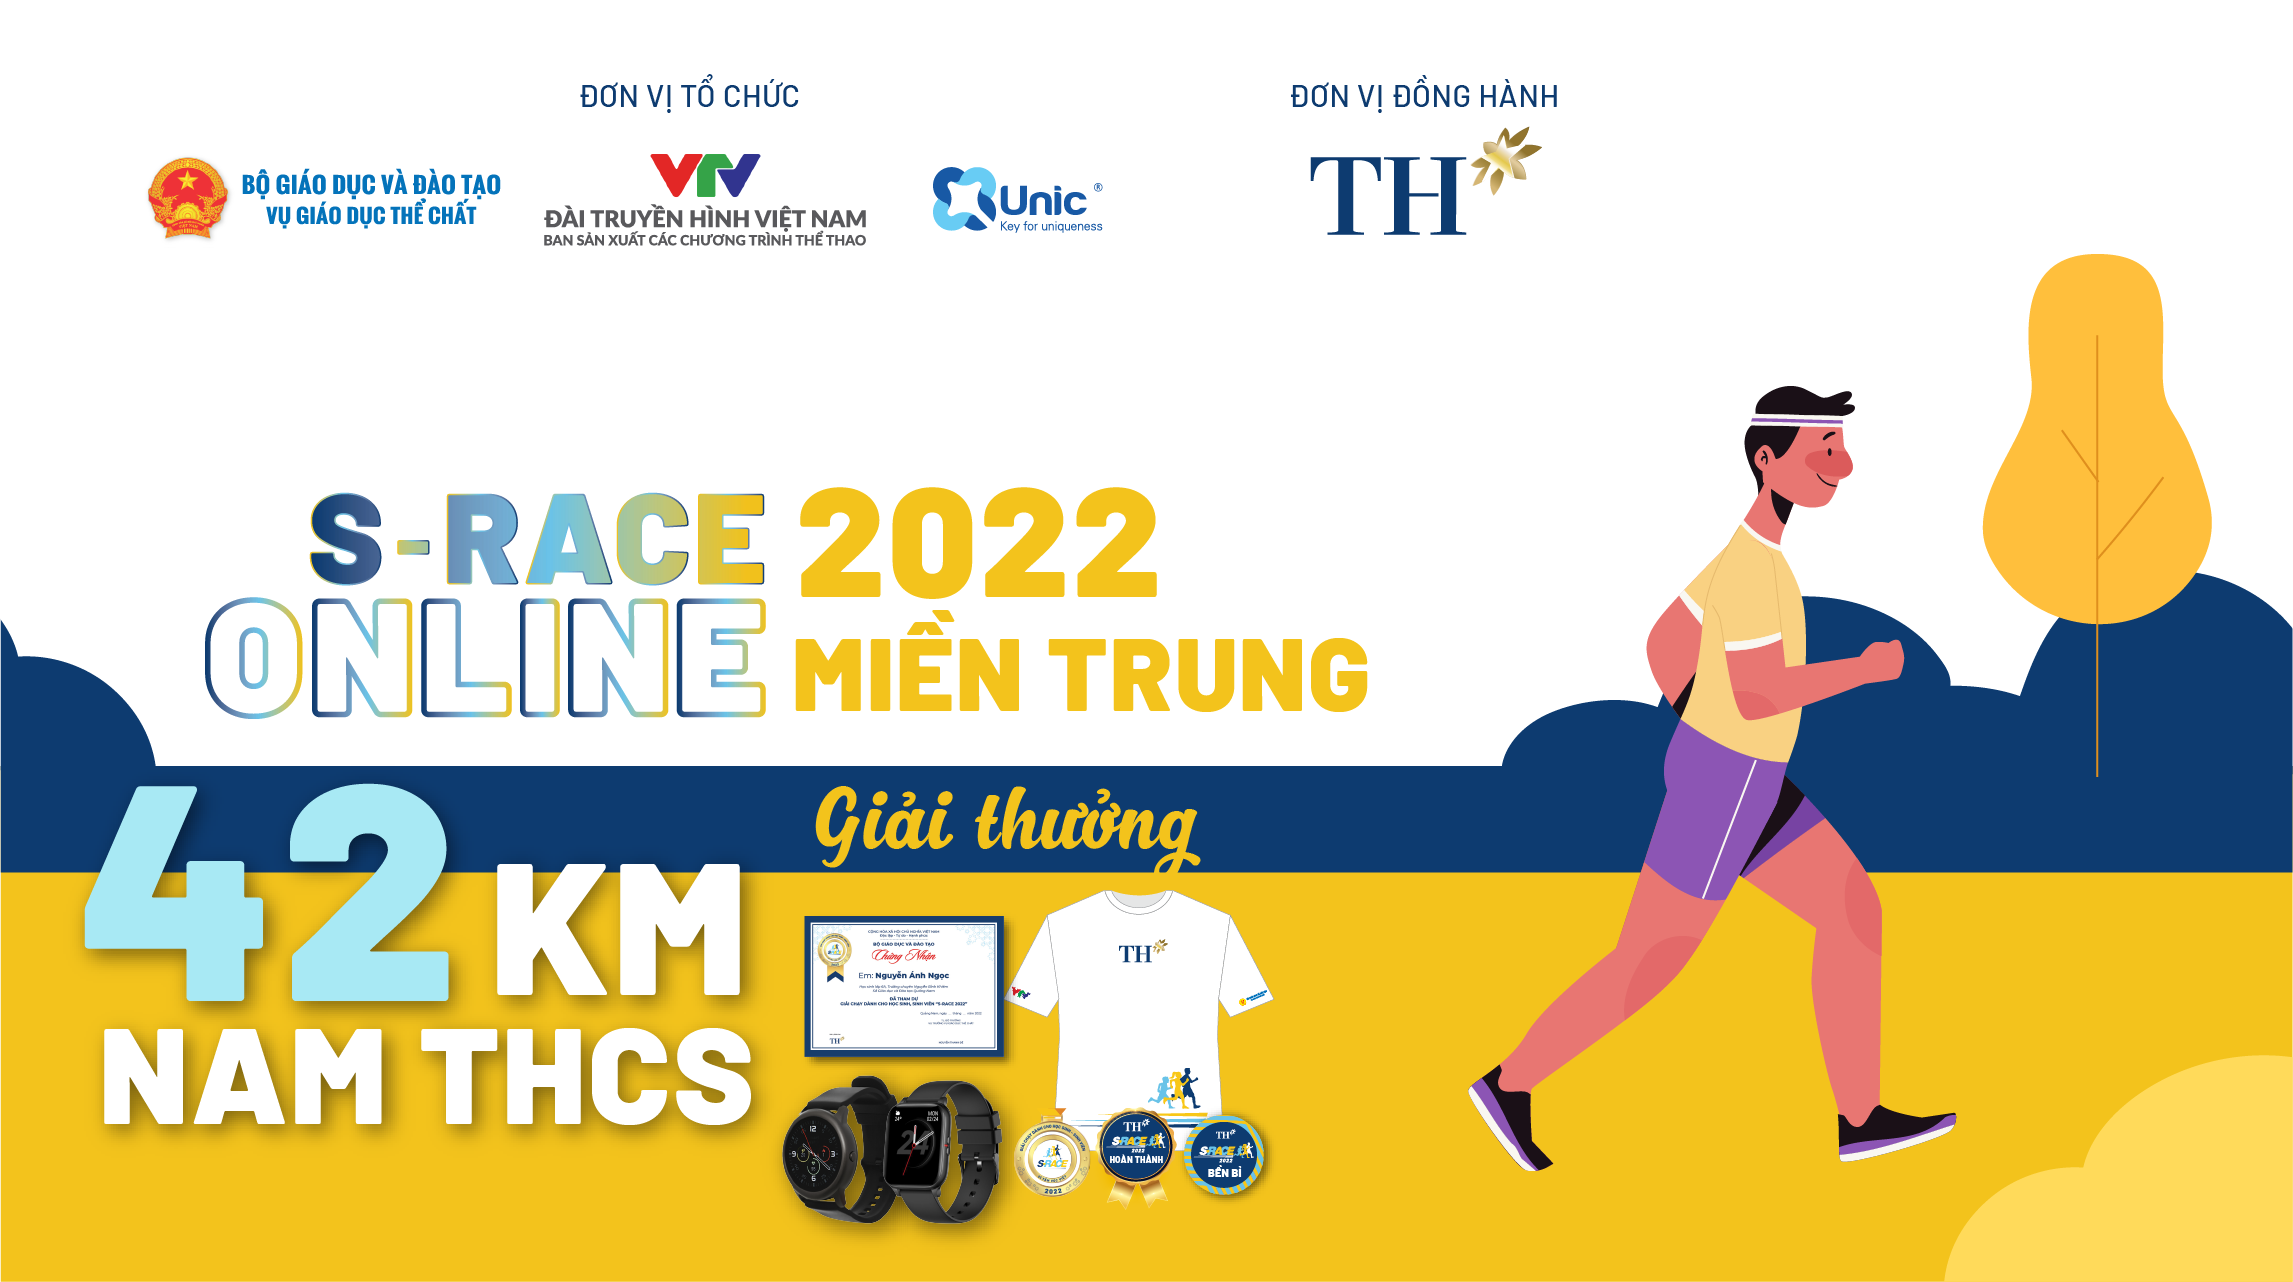 42 KM NAM THCS (S-Race Online miền Trung) - Unlimited Chain